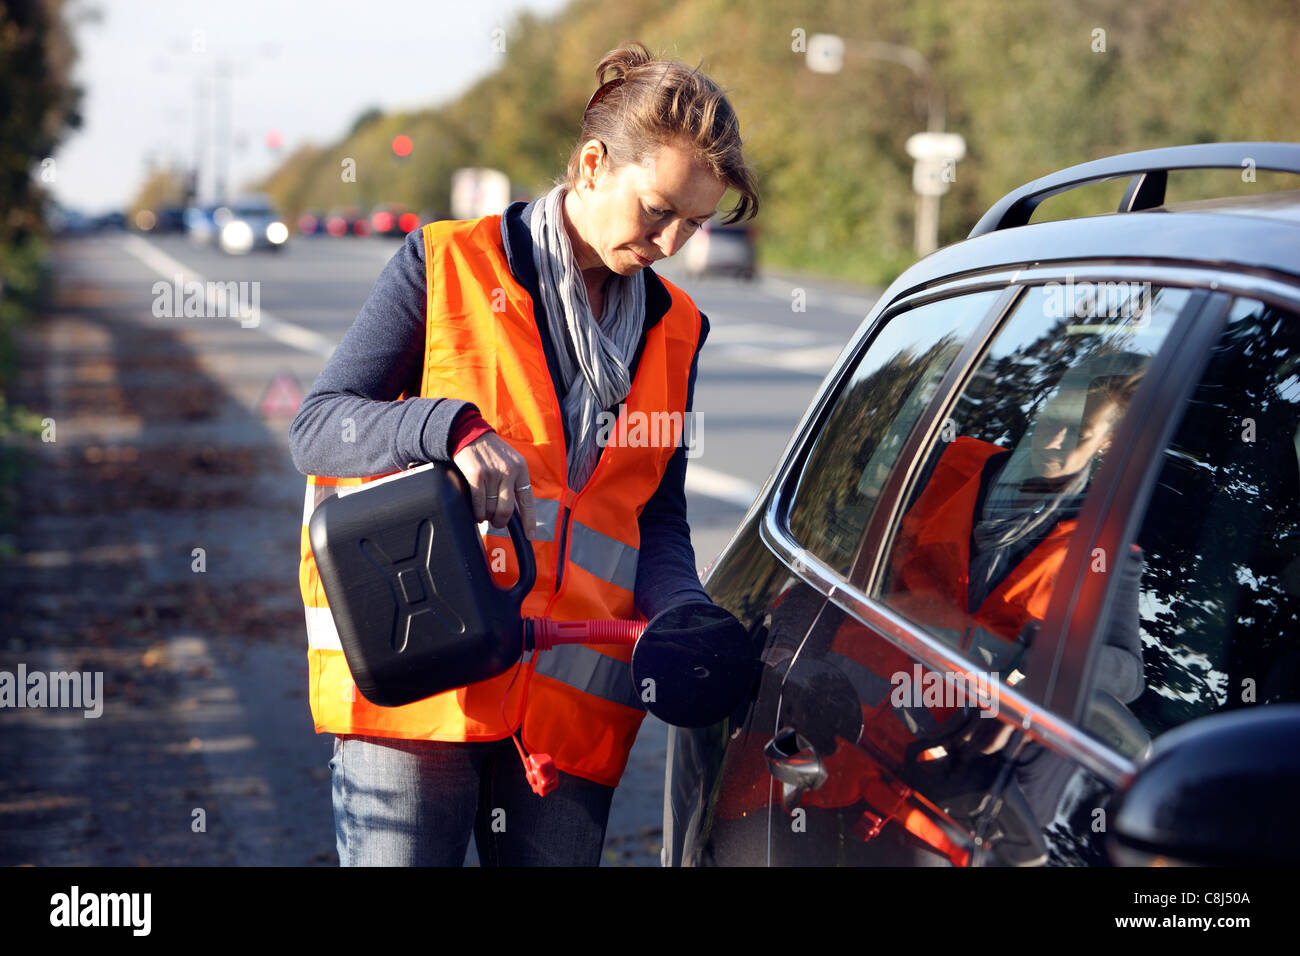 Car breakdown, out of fuel, female driver is refueling the car with a spare can. Stock Photo